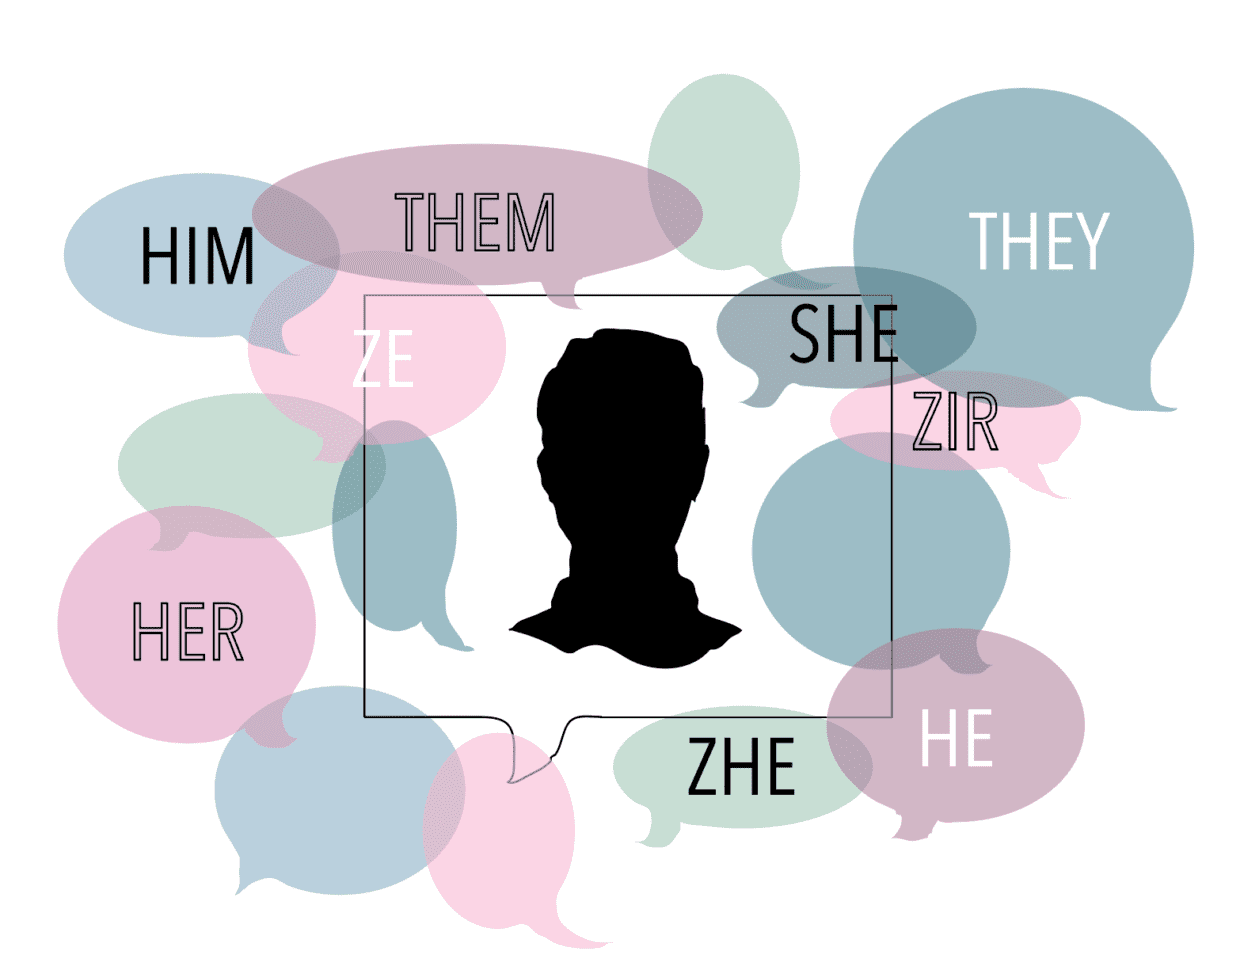 Are More Teachers Asking for Pronouns?